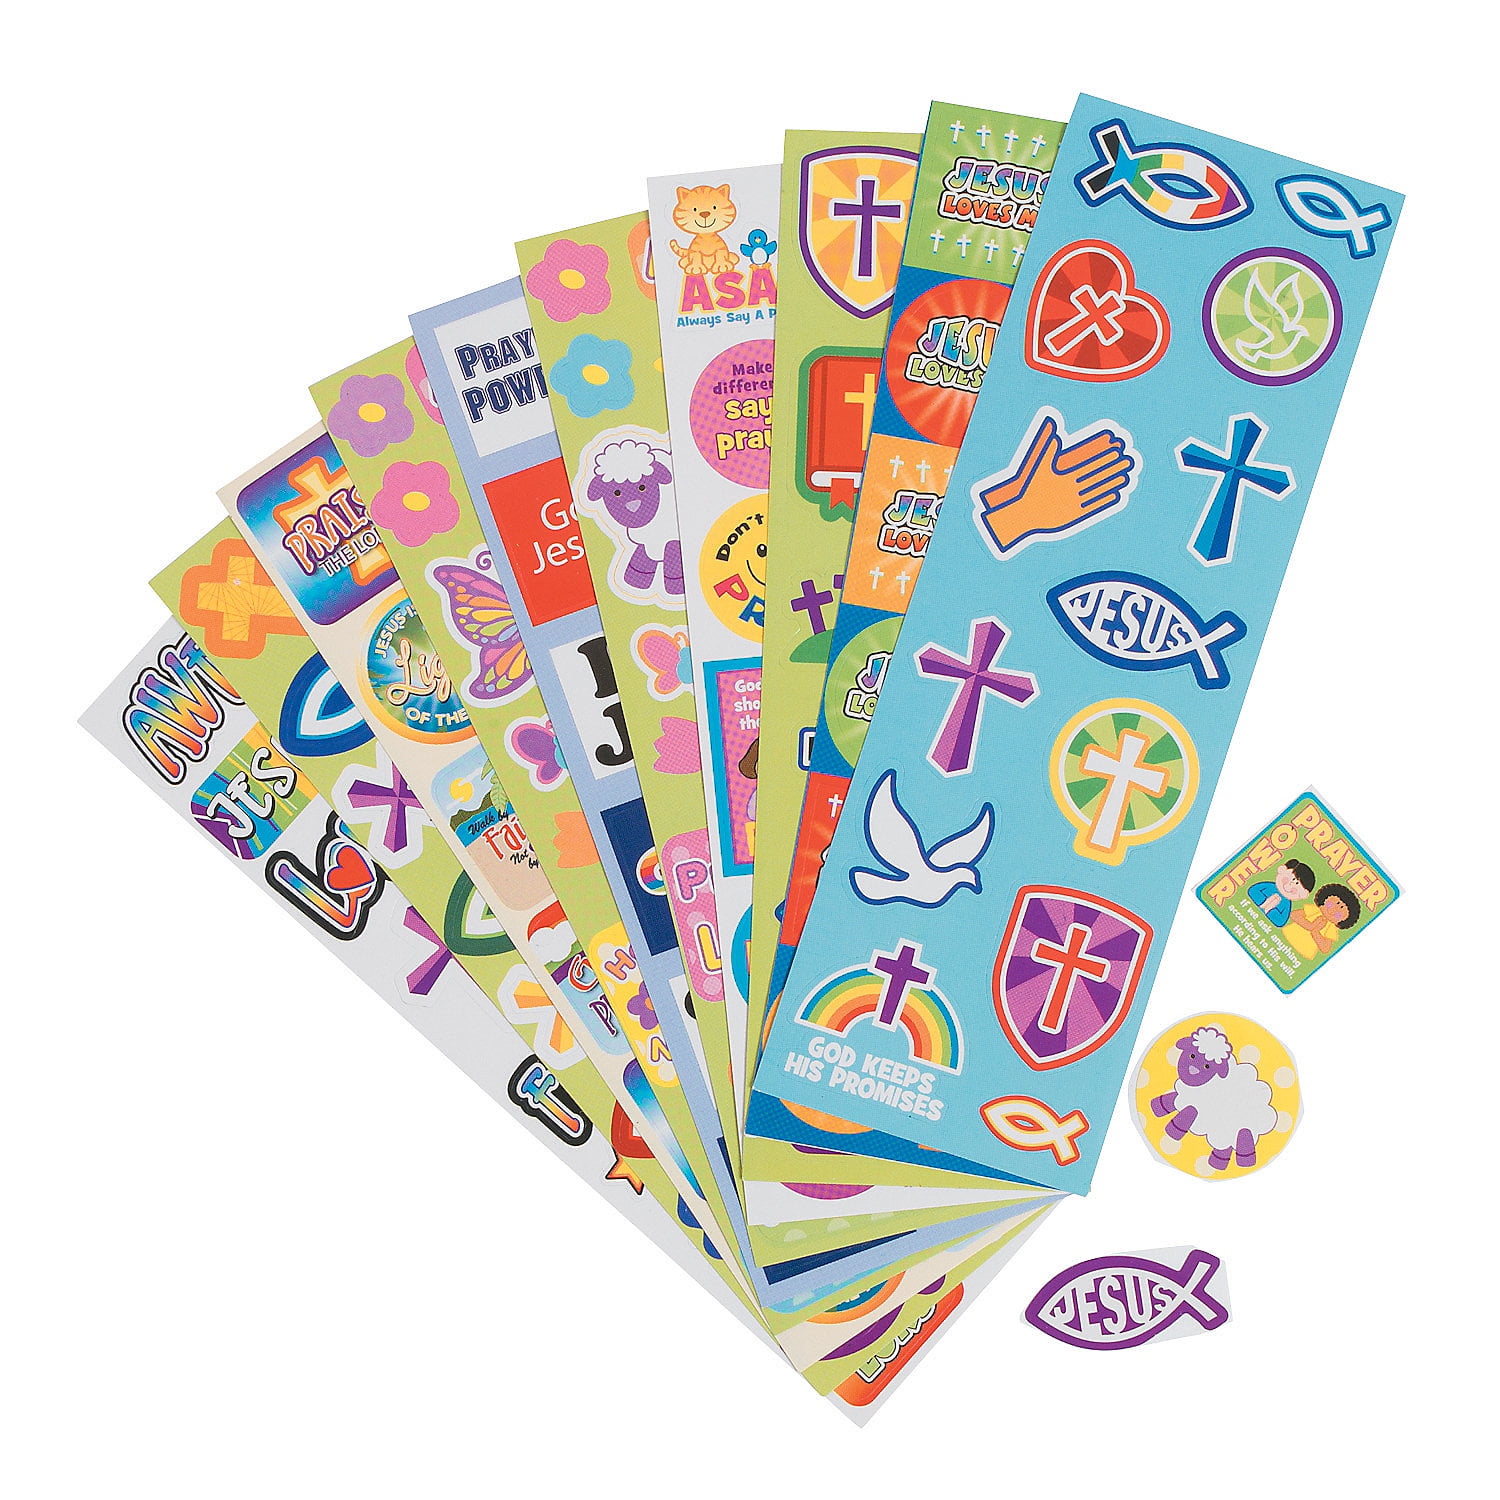 religious-sticker-assortment-100-sheets-stationery-100-pieces